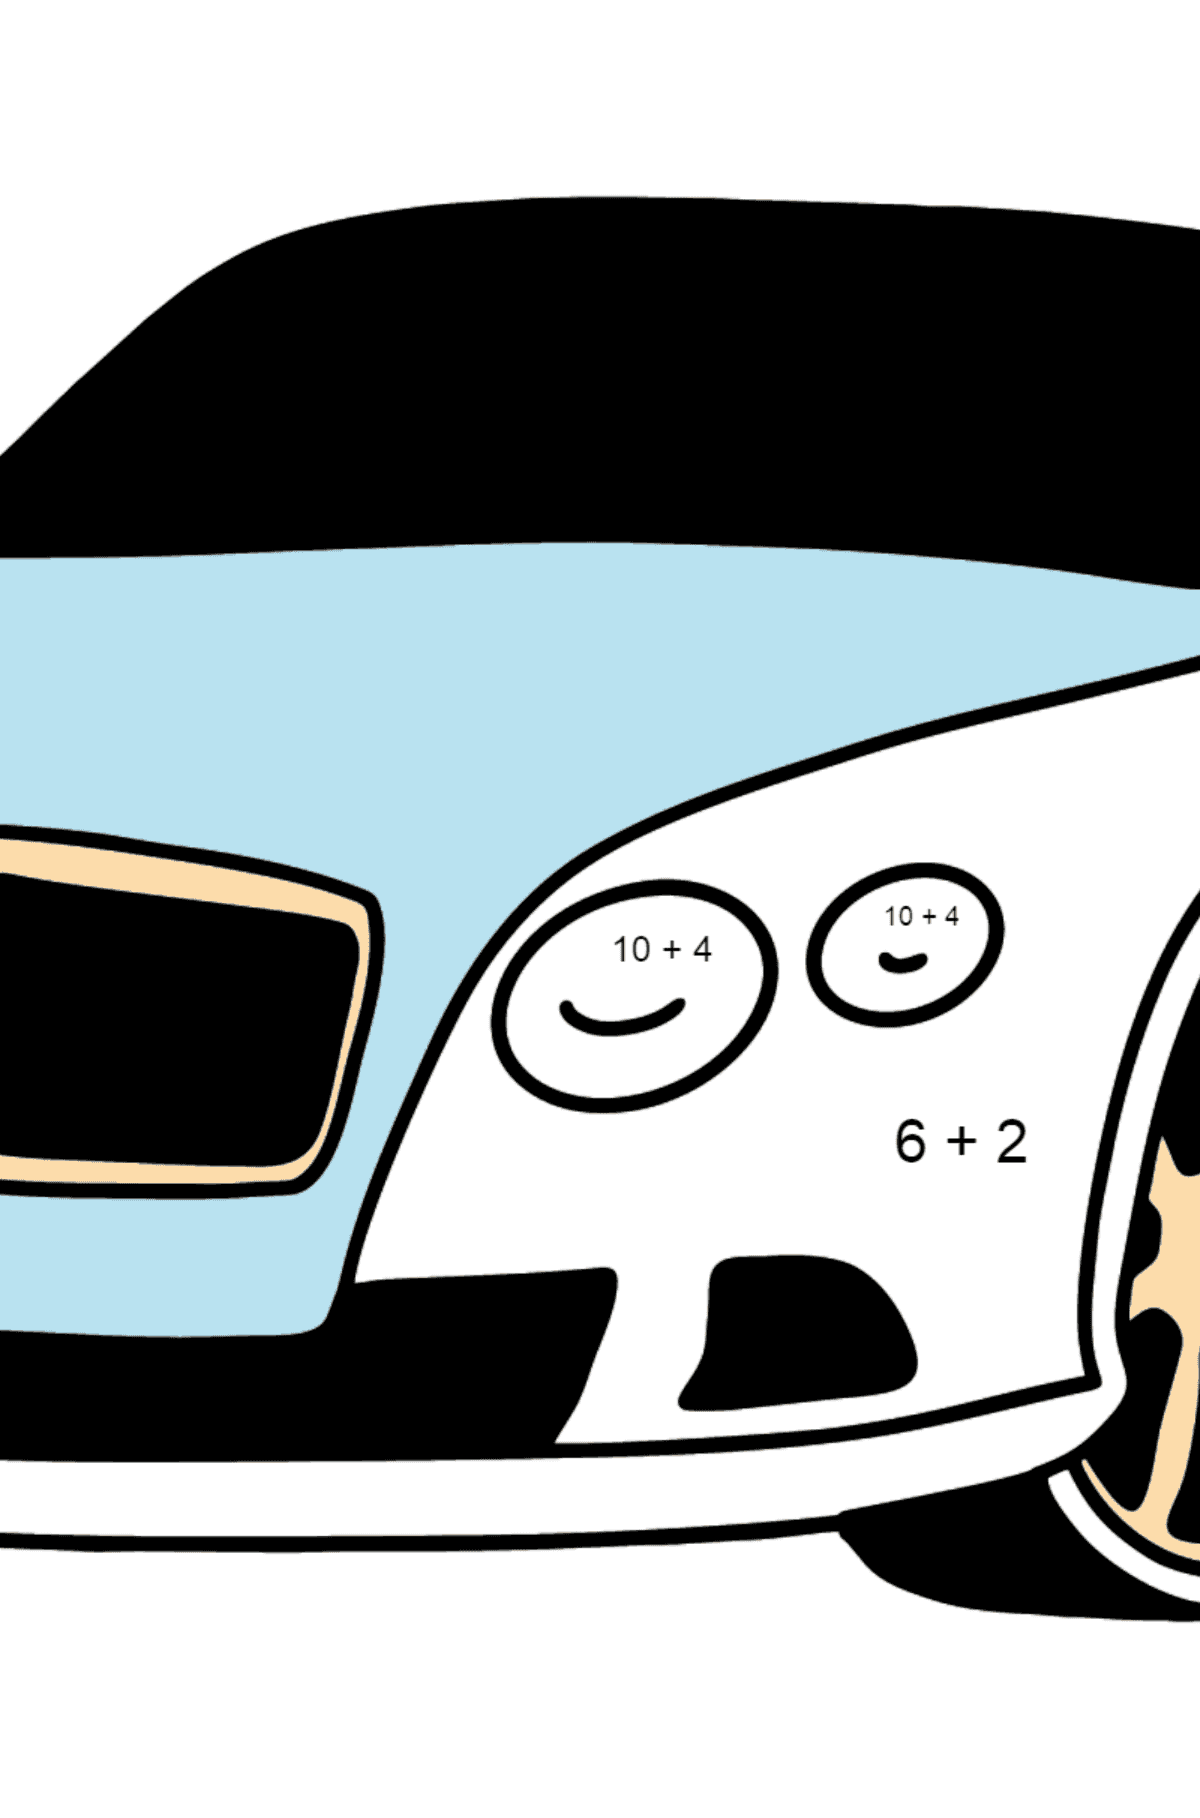 Bentley Continental GT Car coloring page - Math Coloring - Addition for Kids